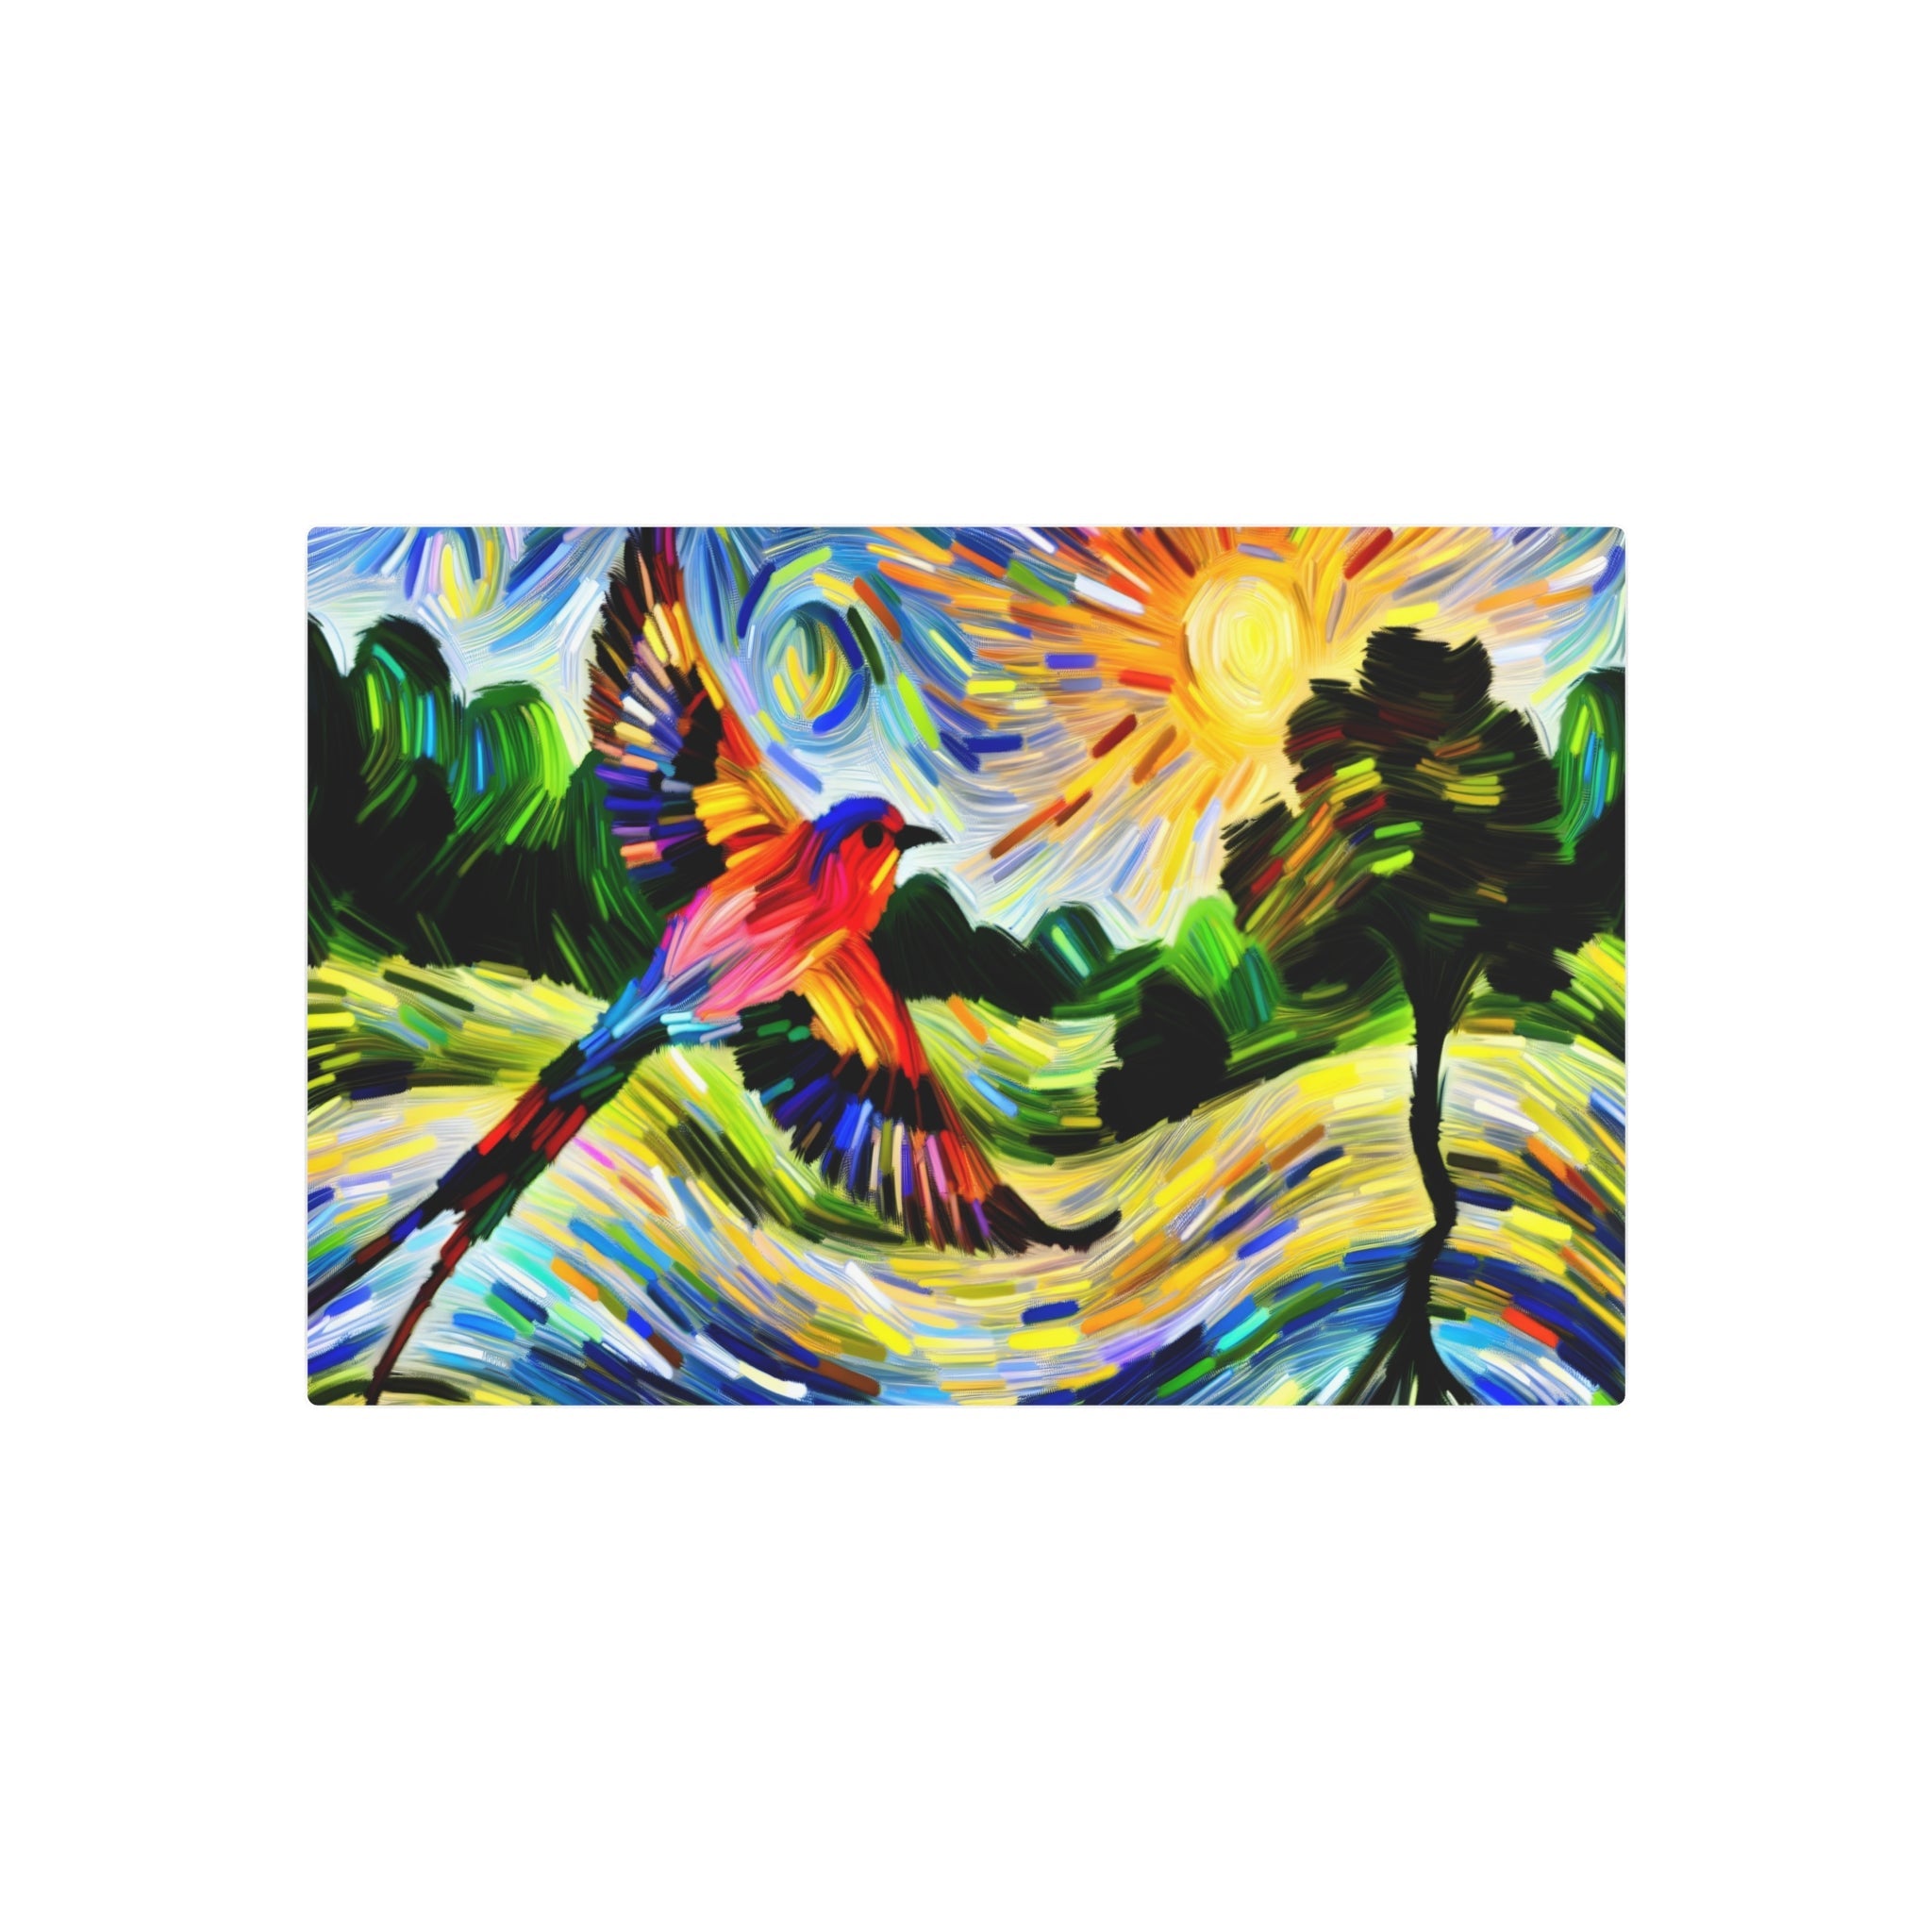 Metal Poster Art | "Impressionist Style Western Art - Vibrant Bird Flying Over Colorful Landscape, Detailed Featherwork and Lively Nature Elements" - Metal Poster Art 30″ x 20″ (Horizontal) 0.12''